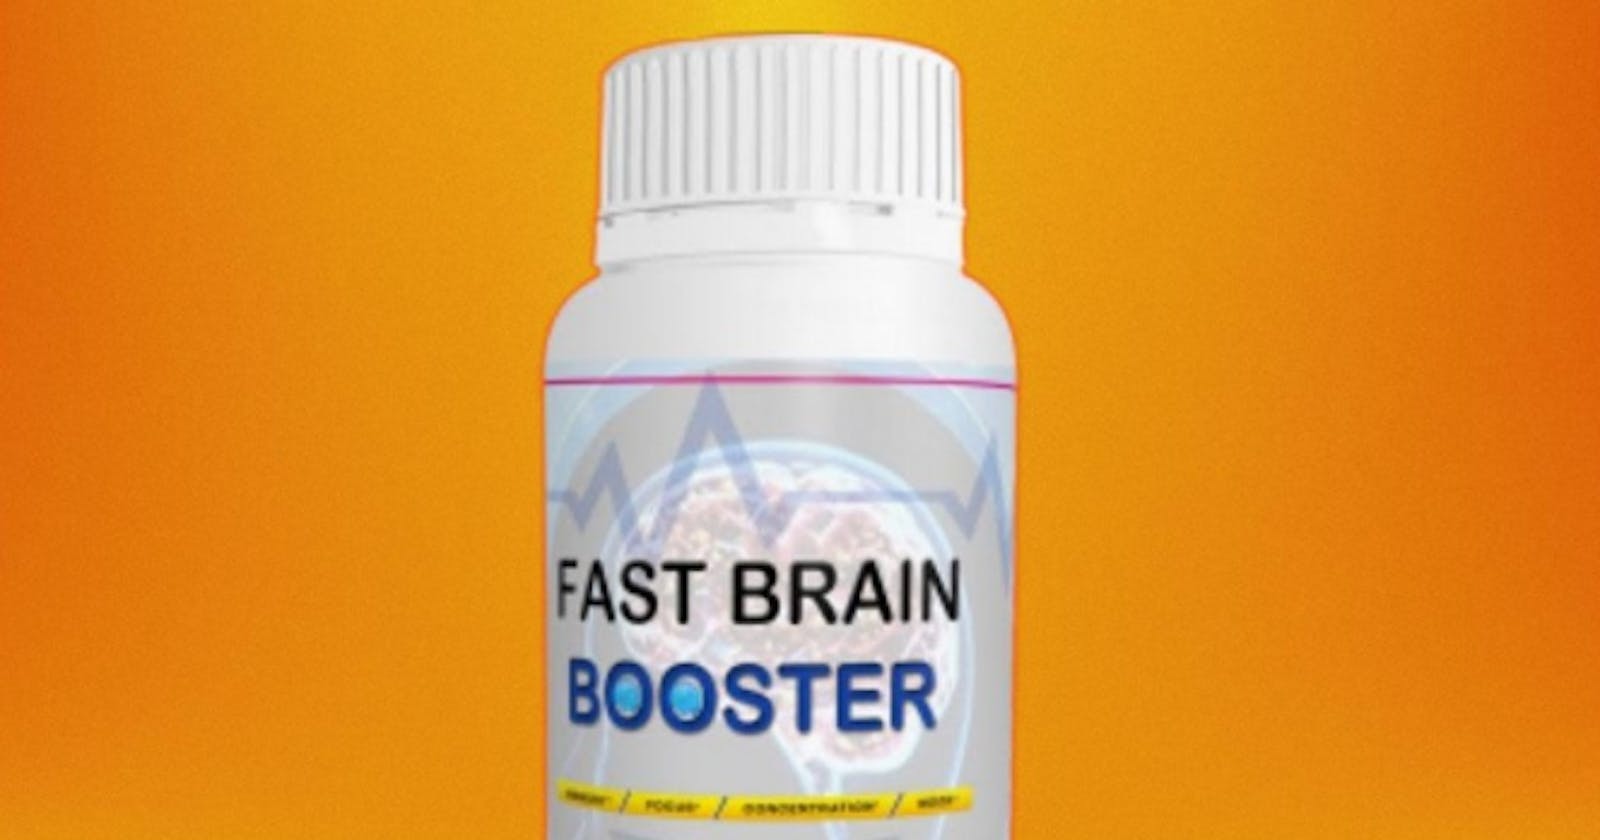 Fast Brain Booster Reviews - Supplement Work For You, *Shocking Result*